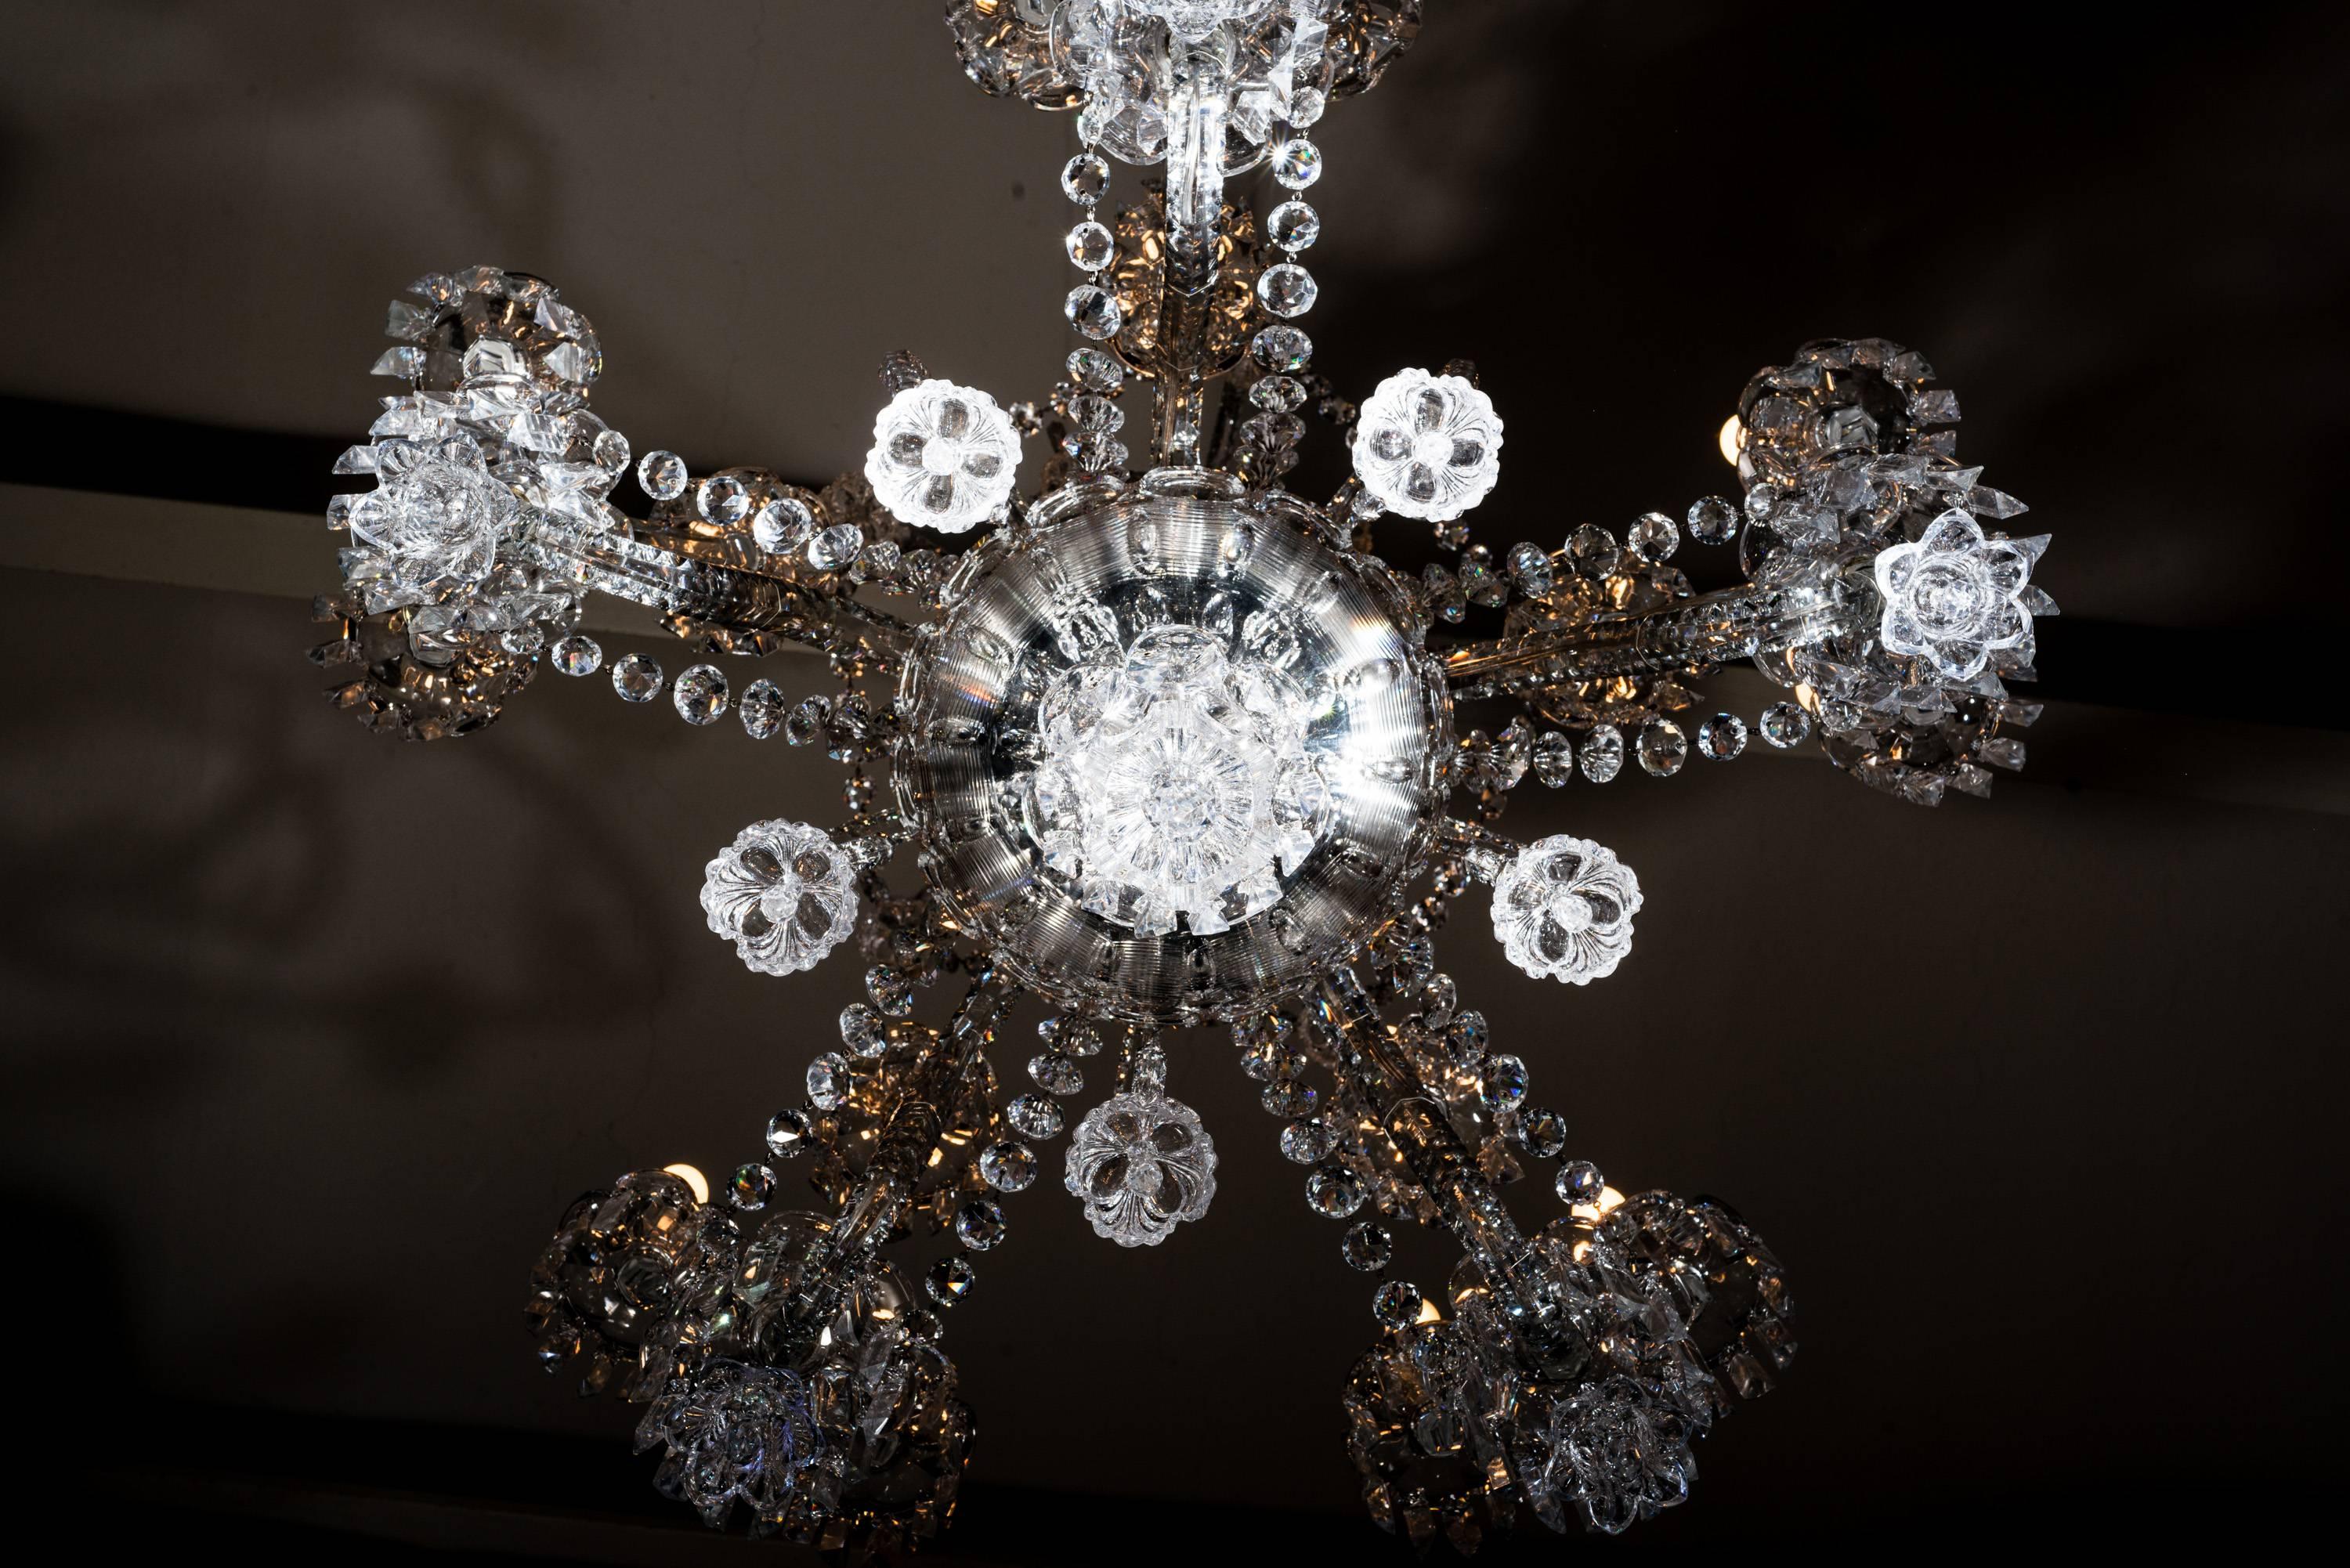 Baccarat Crystal Exceptional Chandelier, France, Early 19th Century For Sale 1